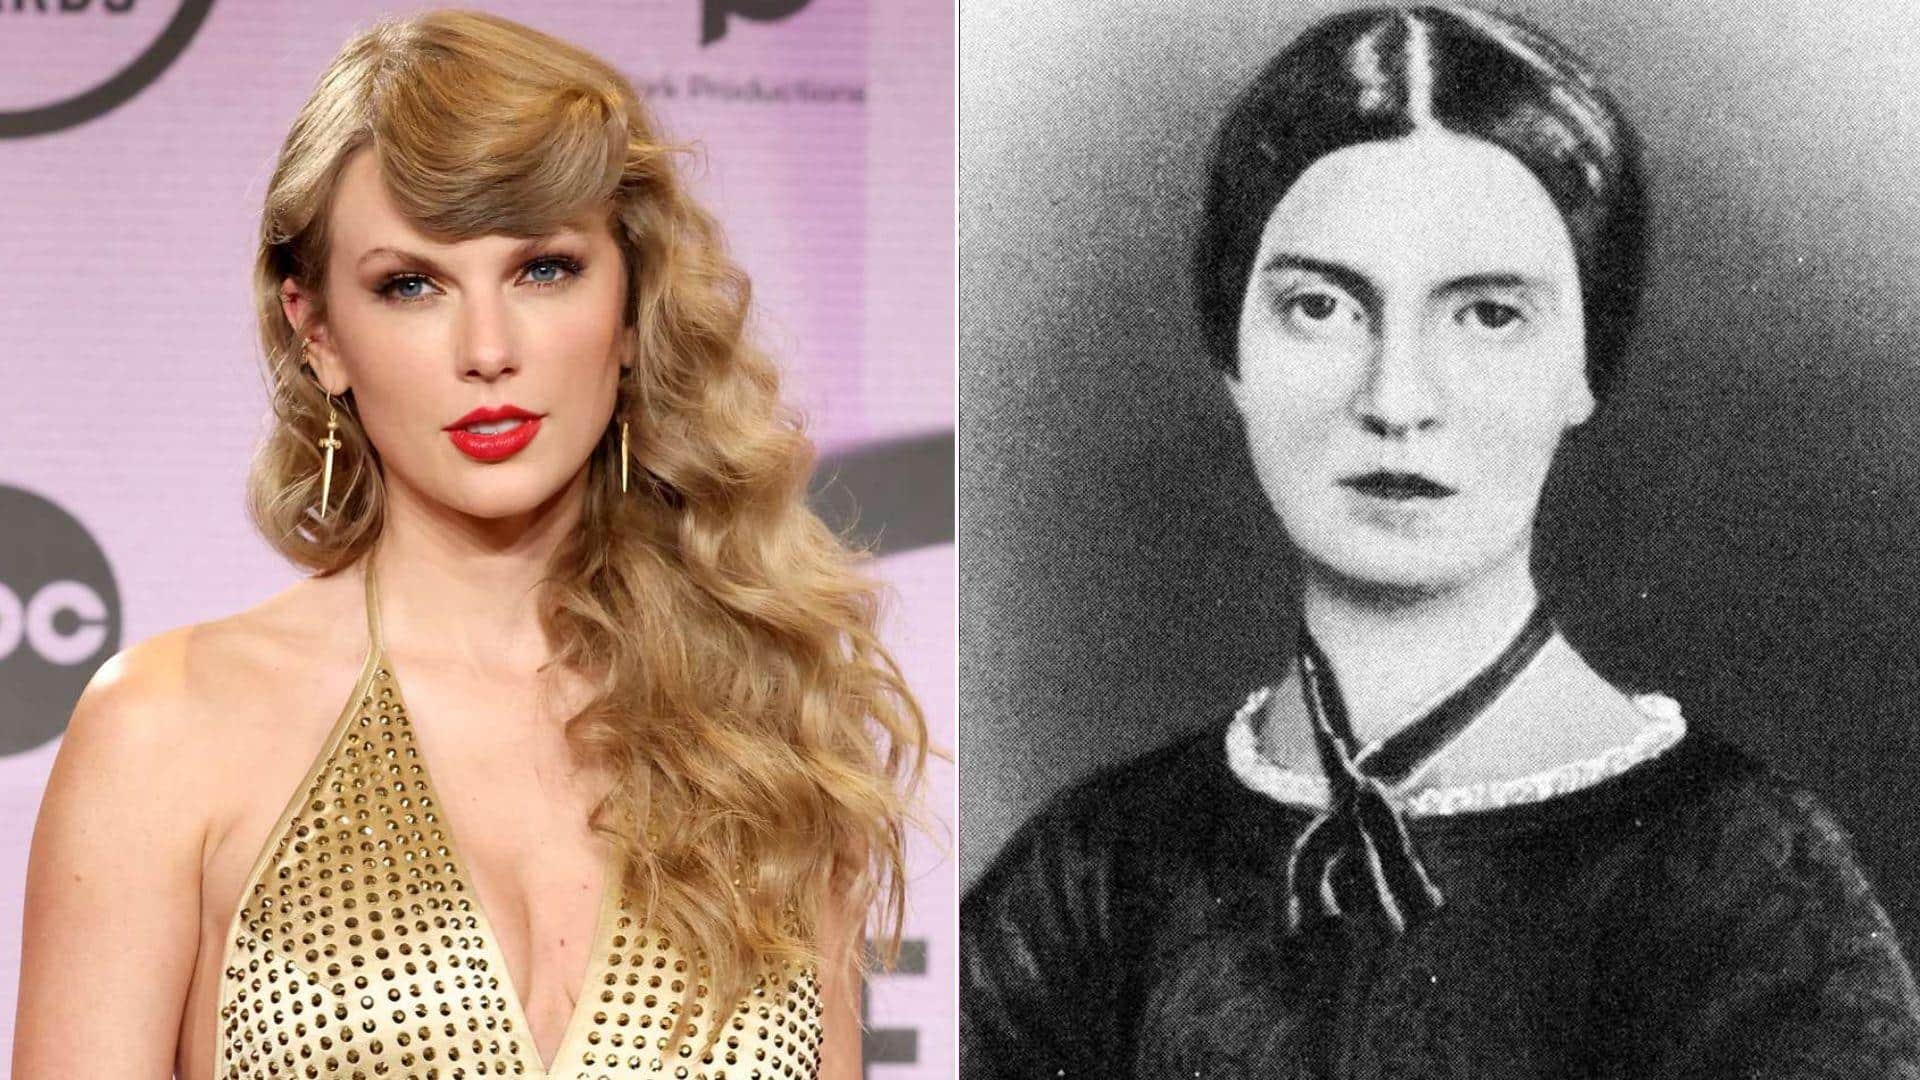 Taylor Swift and Emily Dickinson are distant relatives!